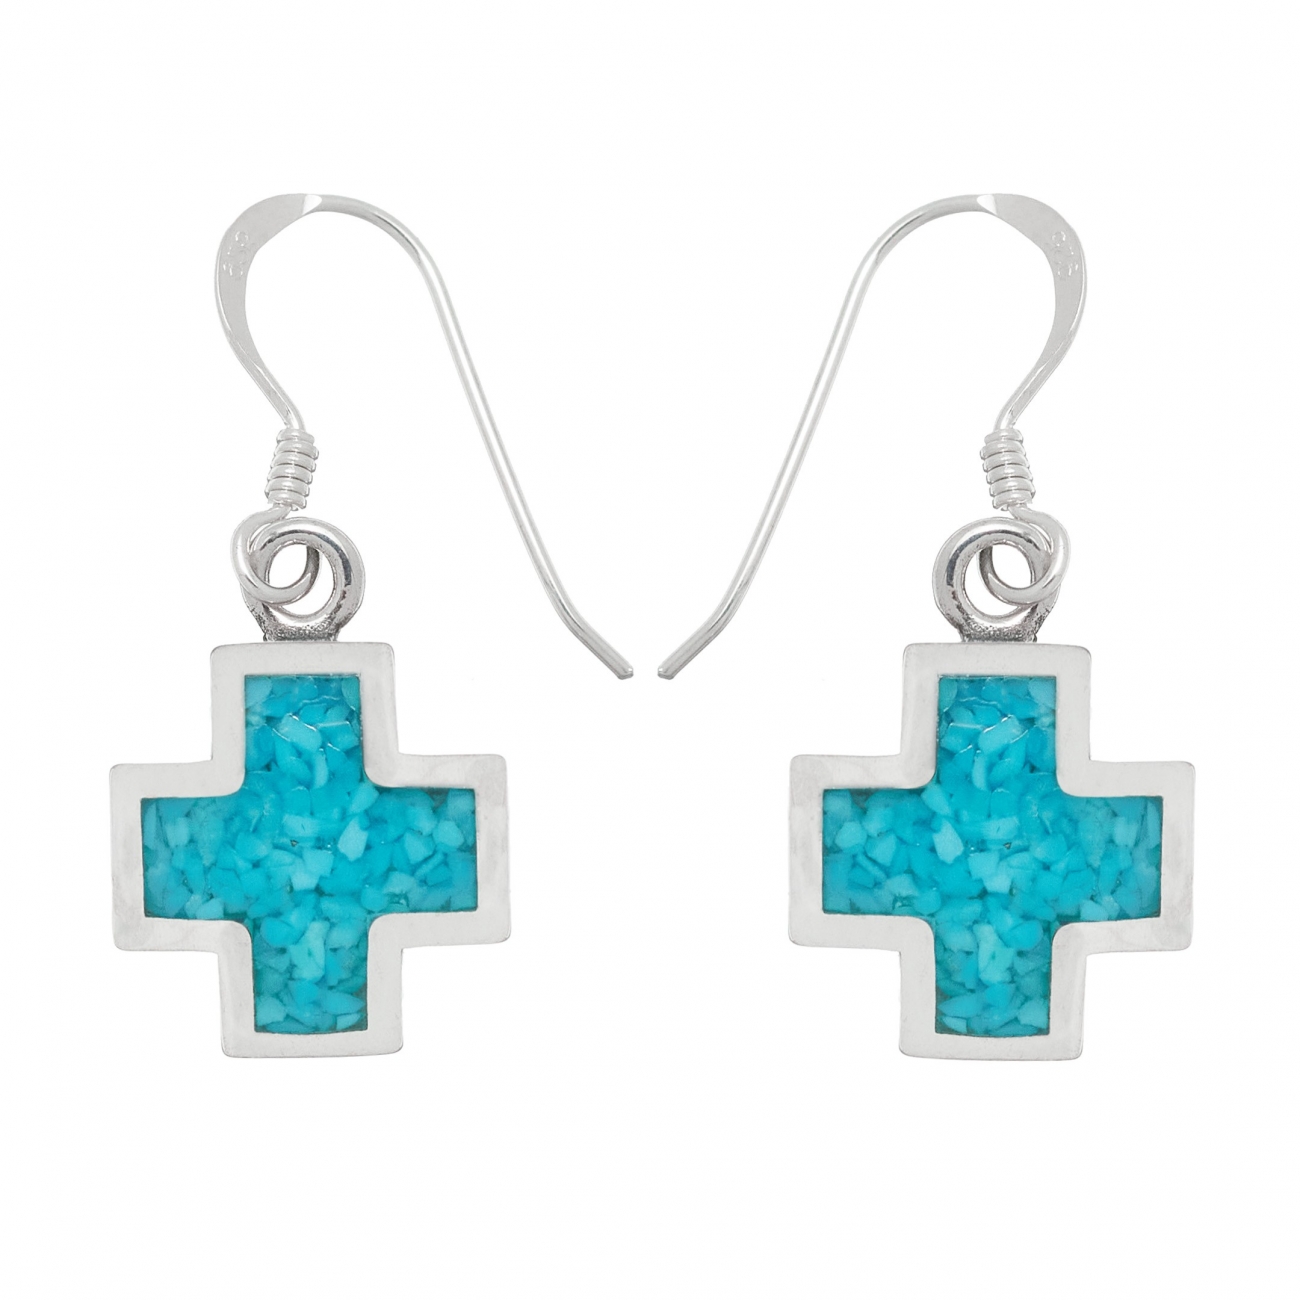 Harpo Paris classic earrings BO49 cross in turquoise and silver